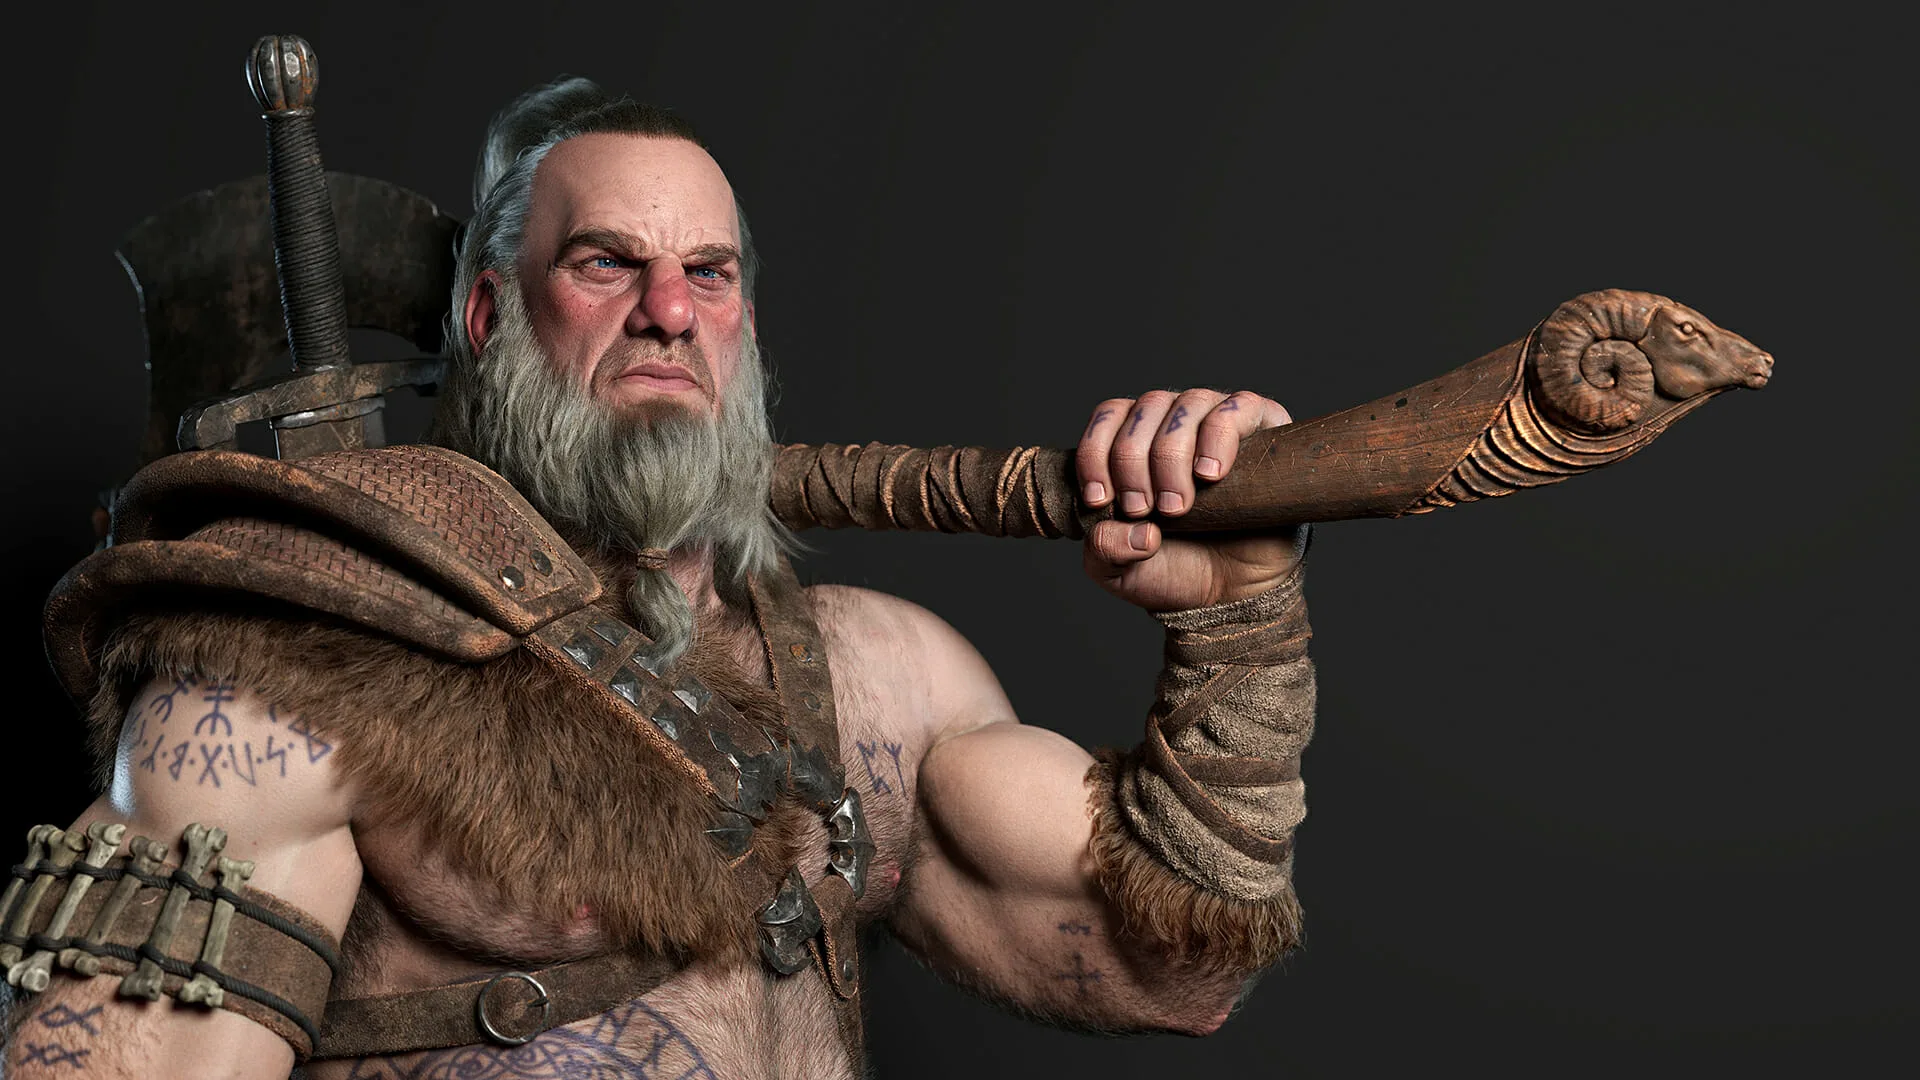 Tutorial: Barbarian - Texturing Realistic Skin for Characters